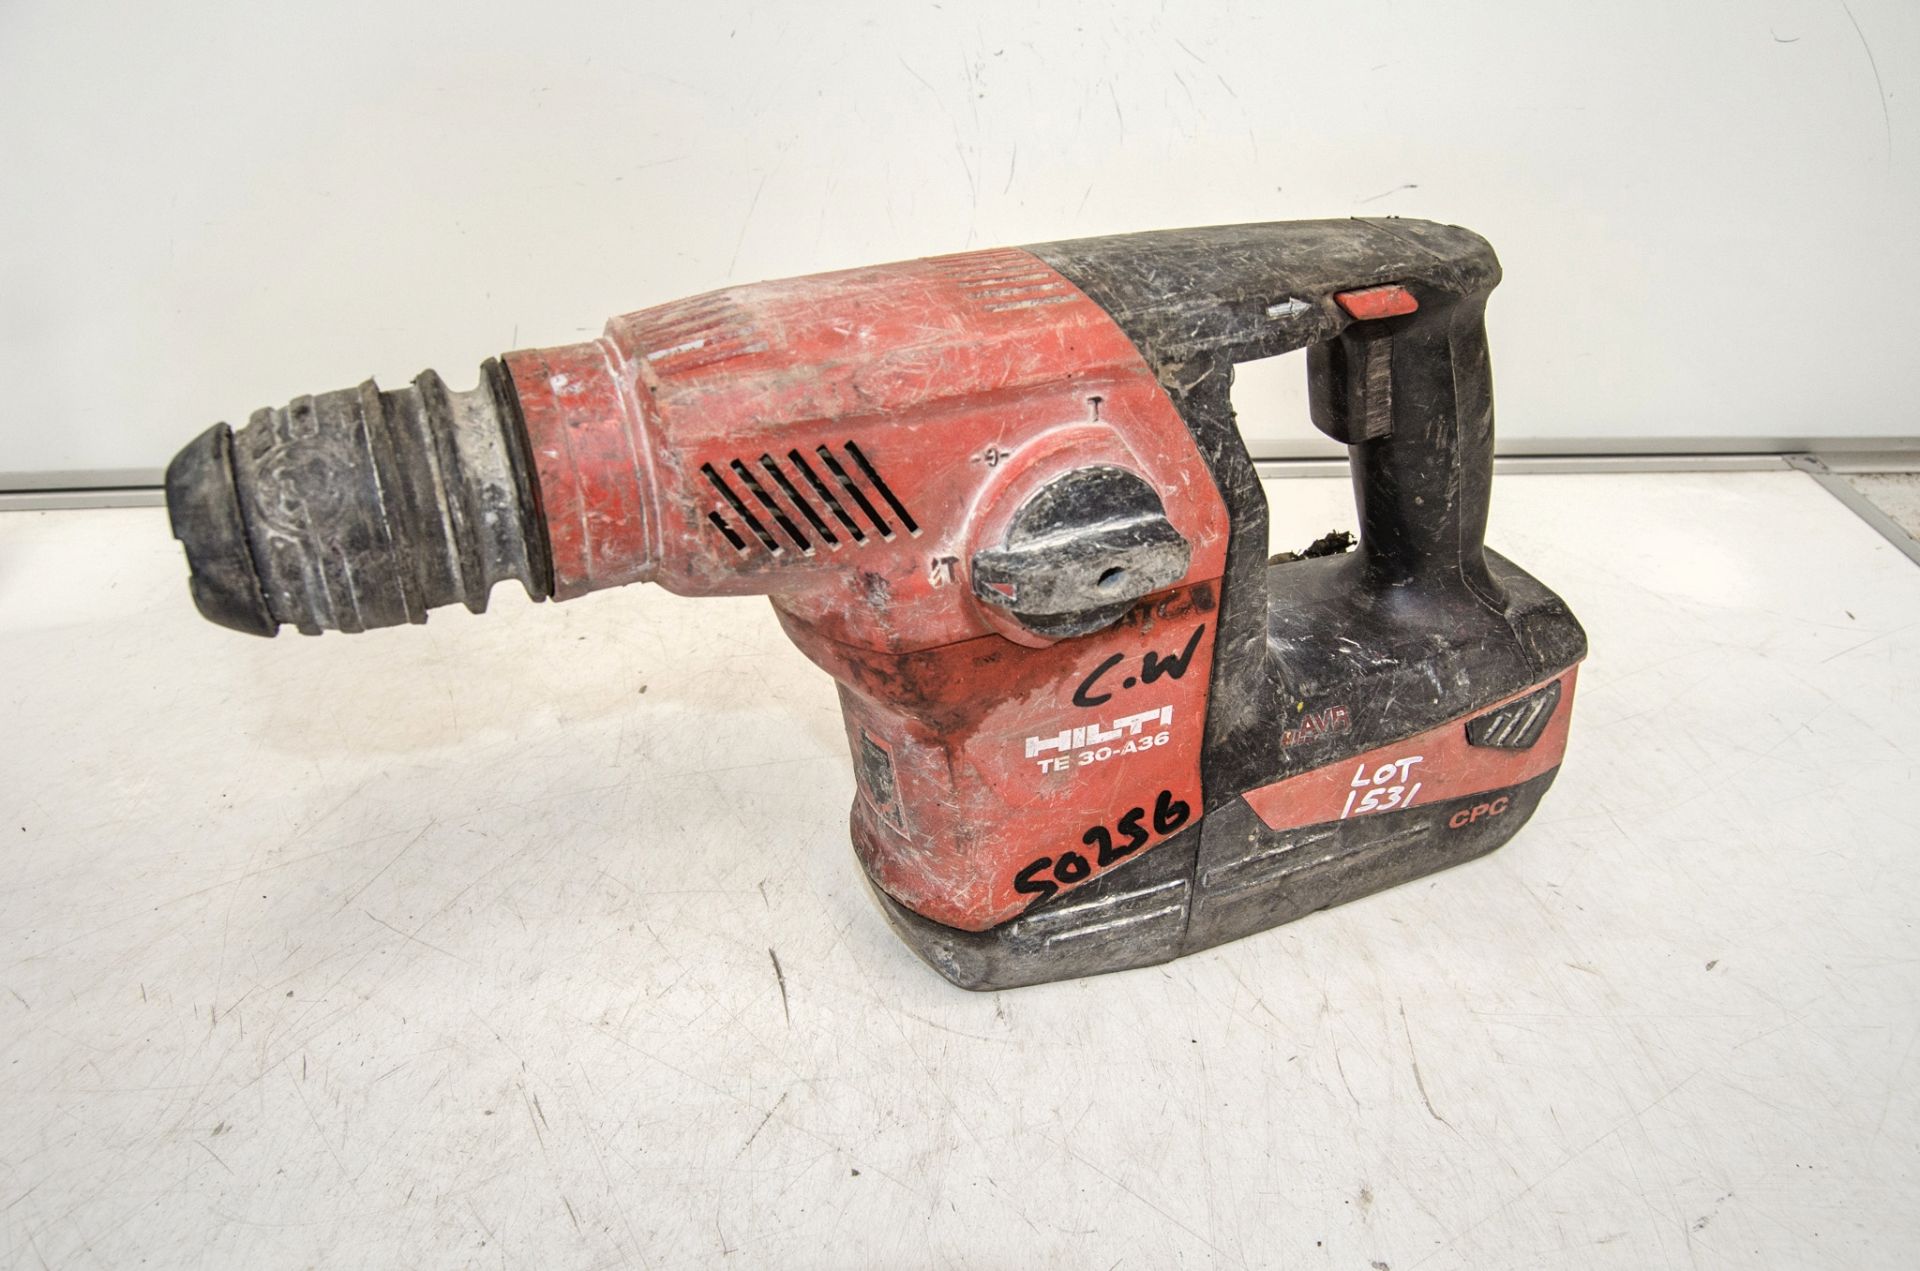 Hilti TE30-A36 36v cordless SDS rotary hammer drill c/w battery 50256 ** No charger **